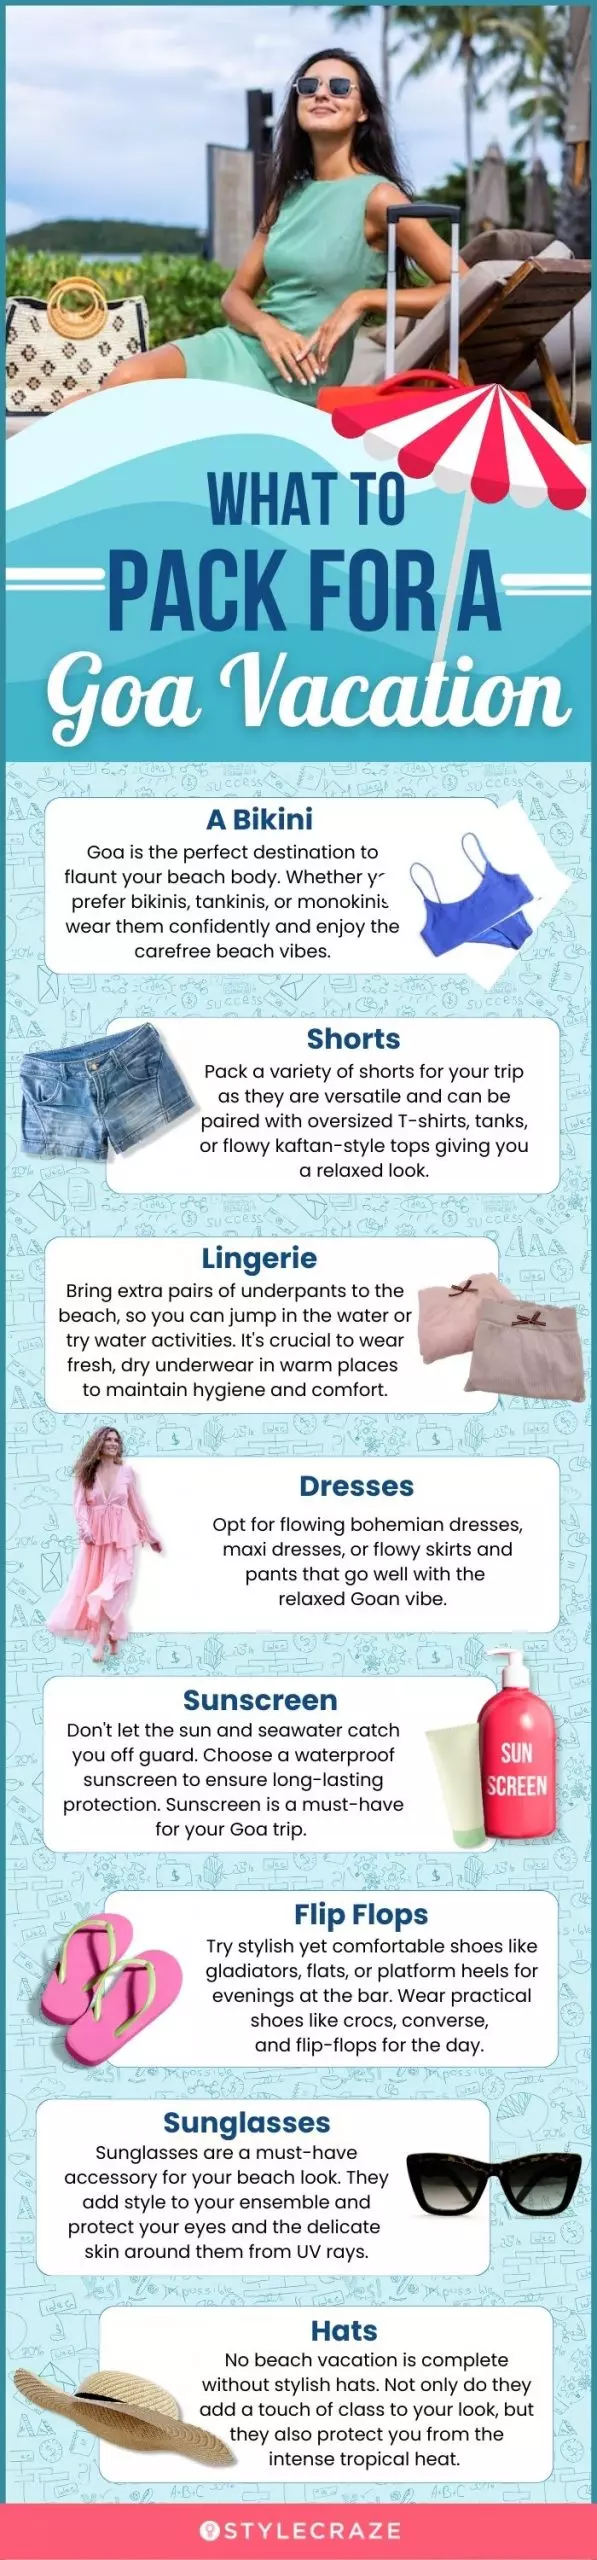 what to pack for a goa vacation (infographic)